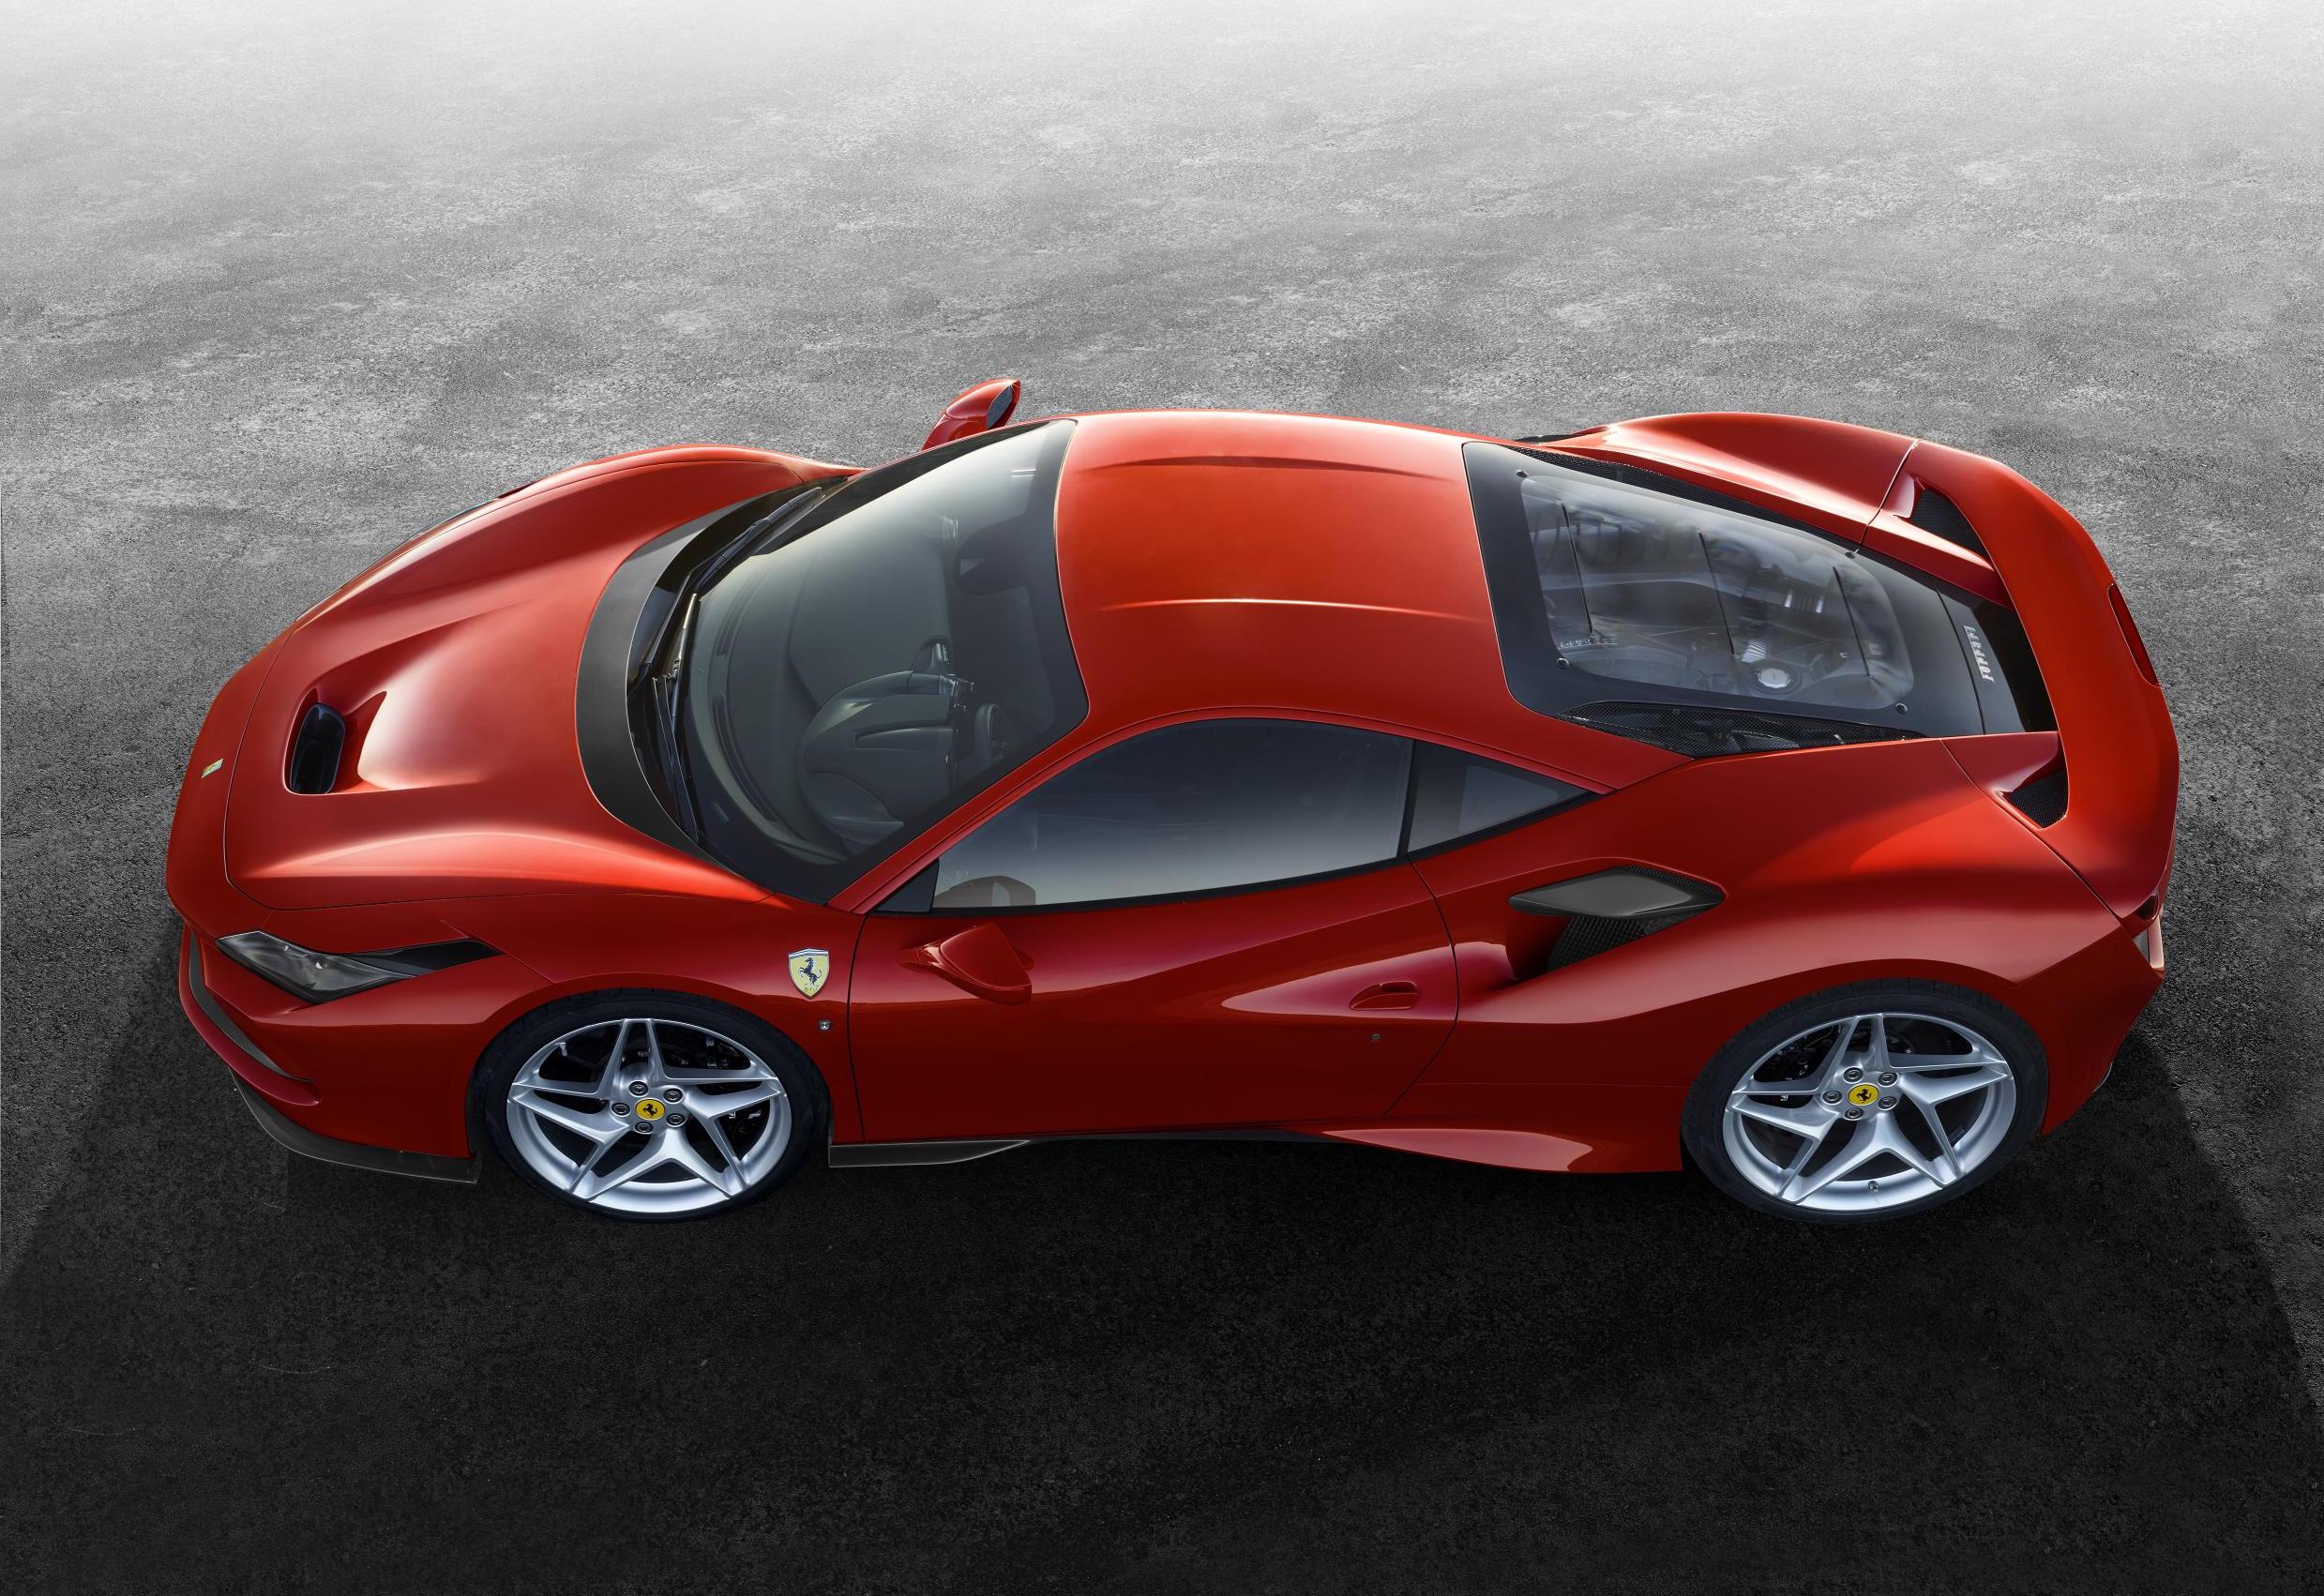 Ferrari F8 Tributo unveiled, gets most powerful V8 ever